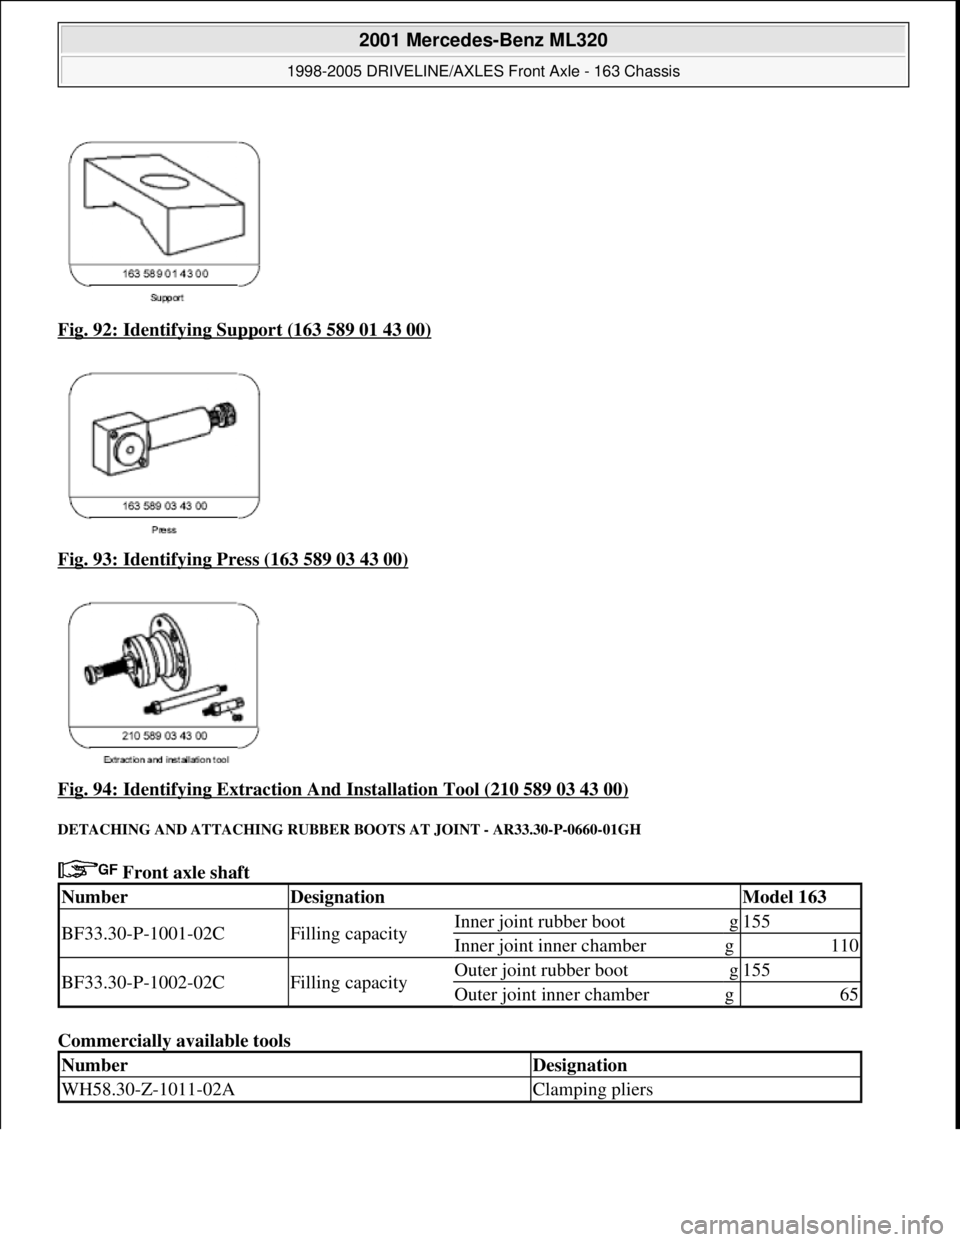 MERCEDES-BENZ ML350 1997  Complete Repair Manual Fig. 92: Identifying Support (163 589 01 43 00)  
Fig. 93: Identifying Press (163 589 03 43 00)
 
Fig. 94: Identifying Extraction A  nd Installation Tool (210 589 03 43 00)
 
DETACHING AND ATTACHING R